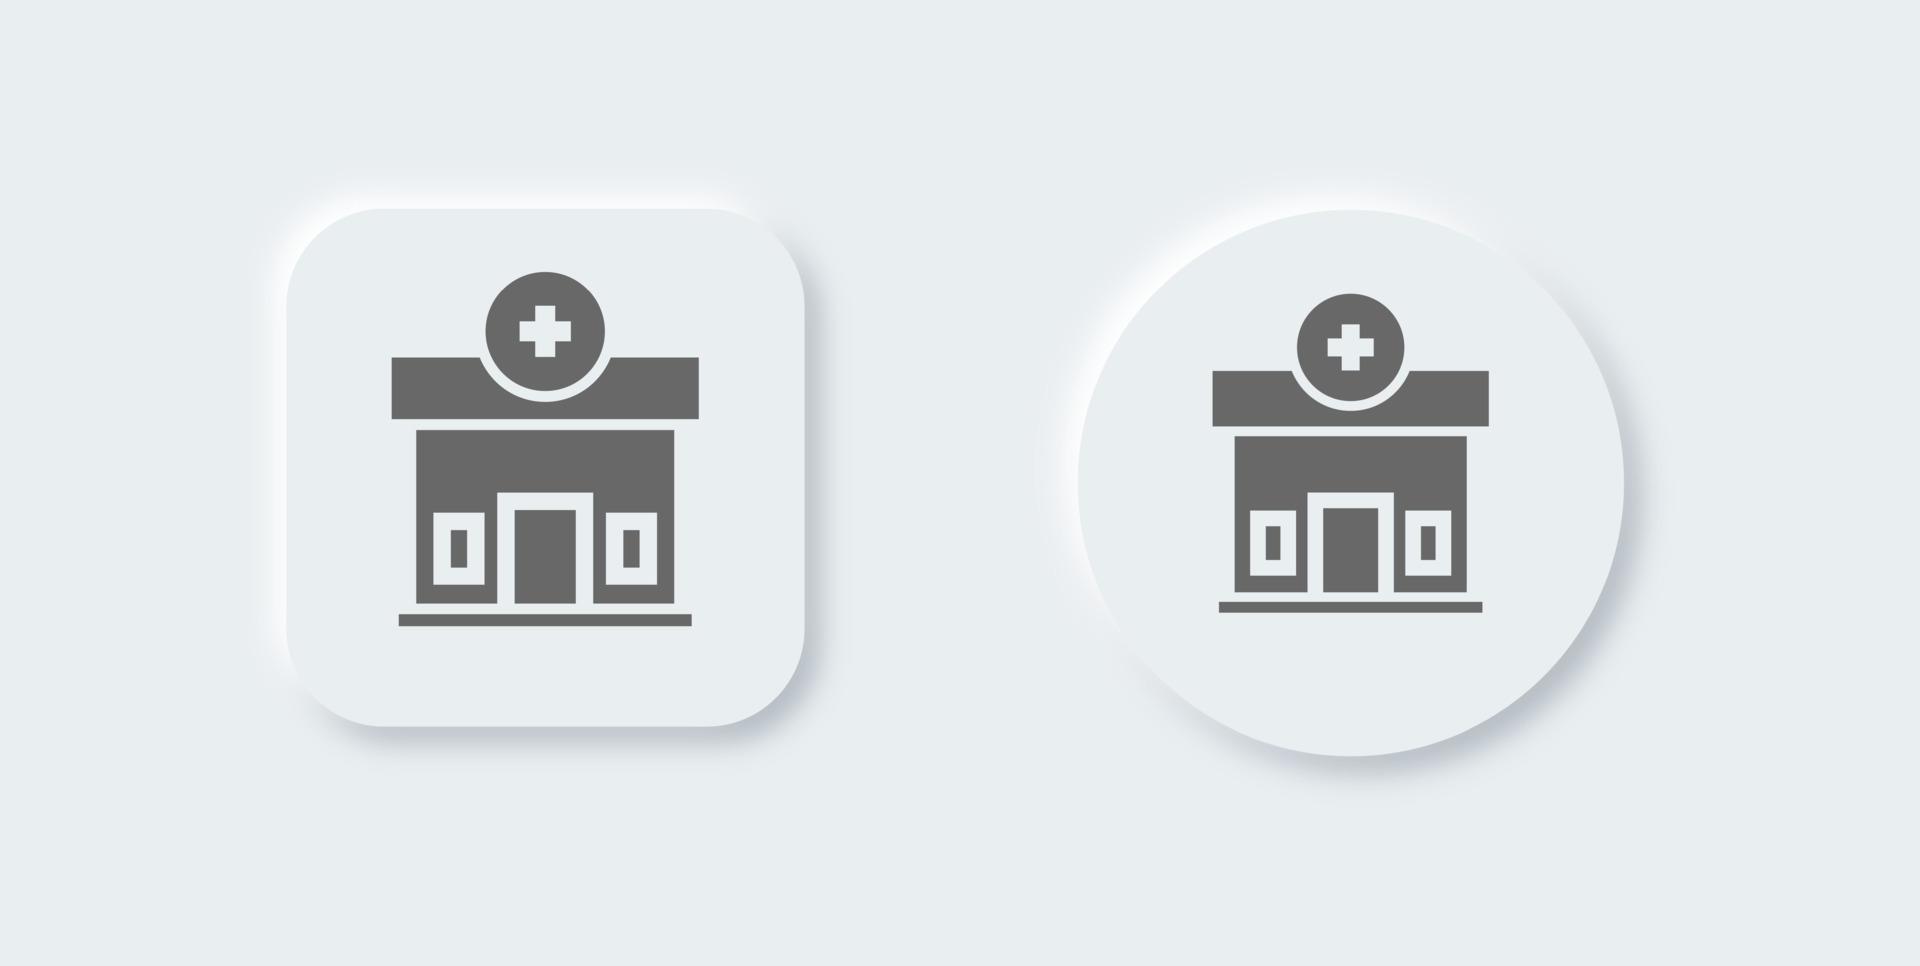 Hospital solid icon in neomorphic design style. Clinic signs vector illustration.